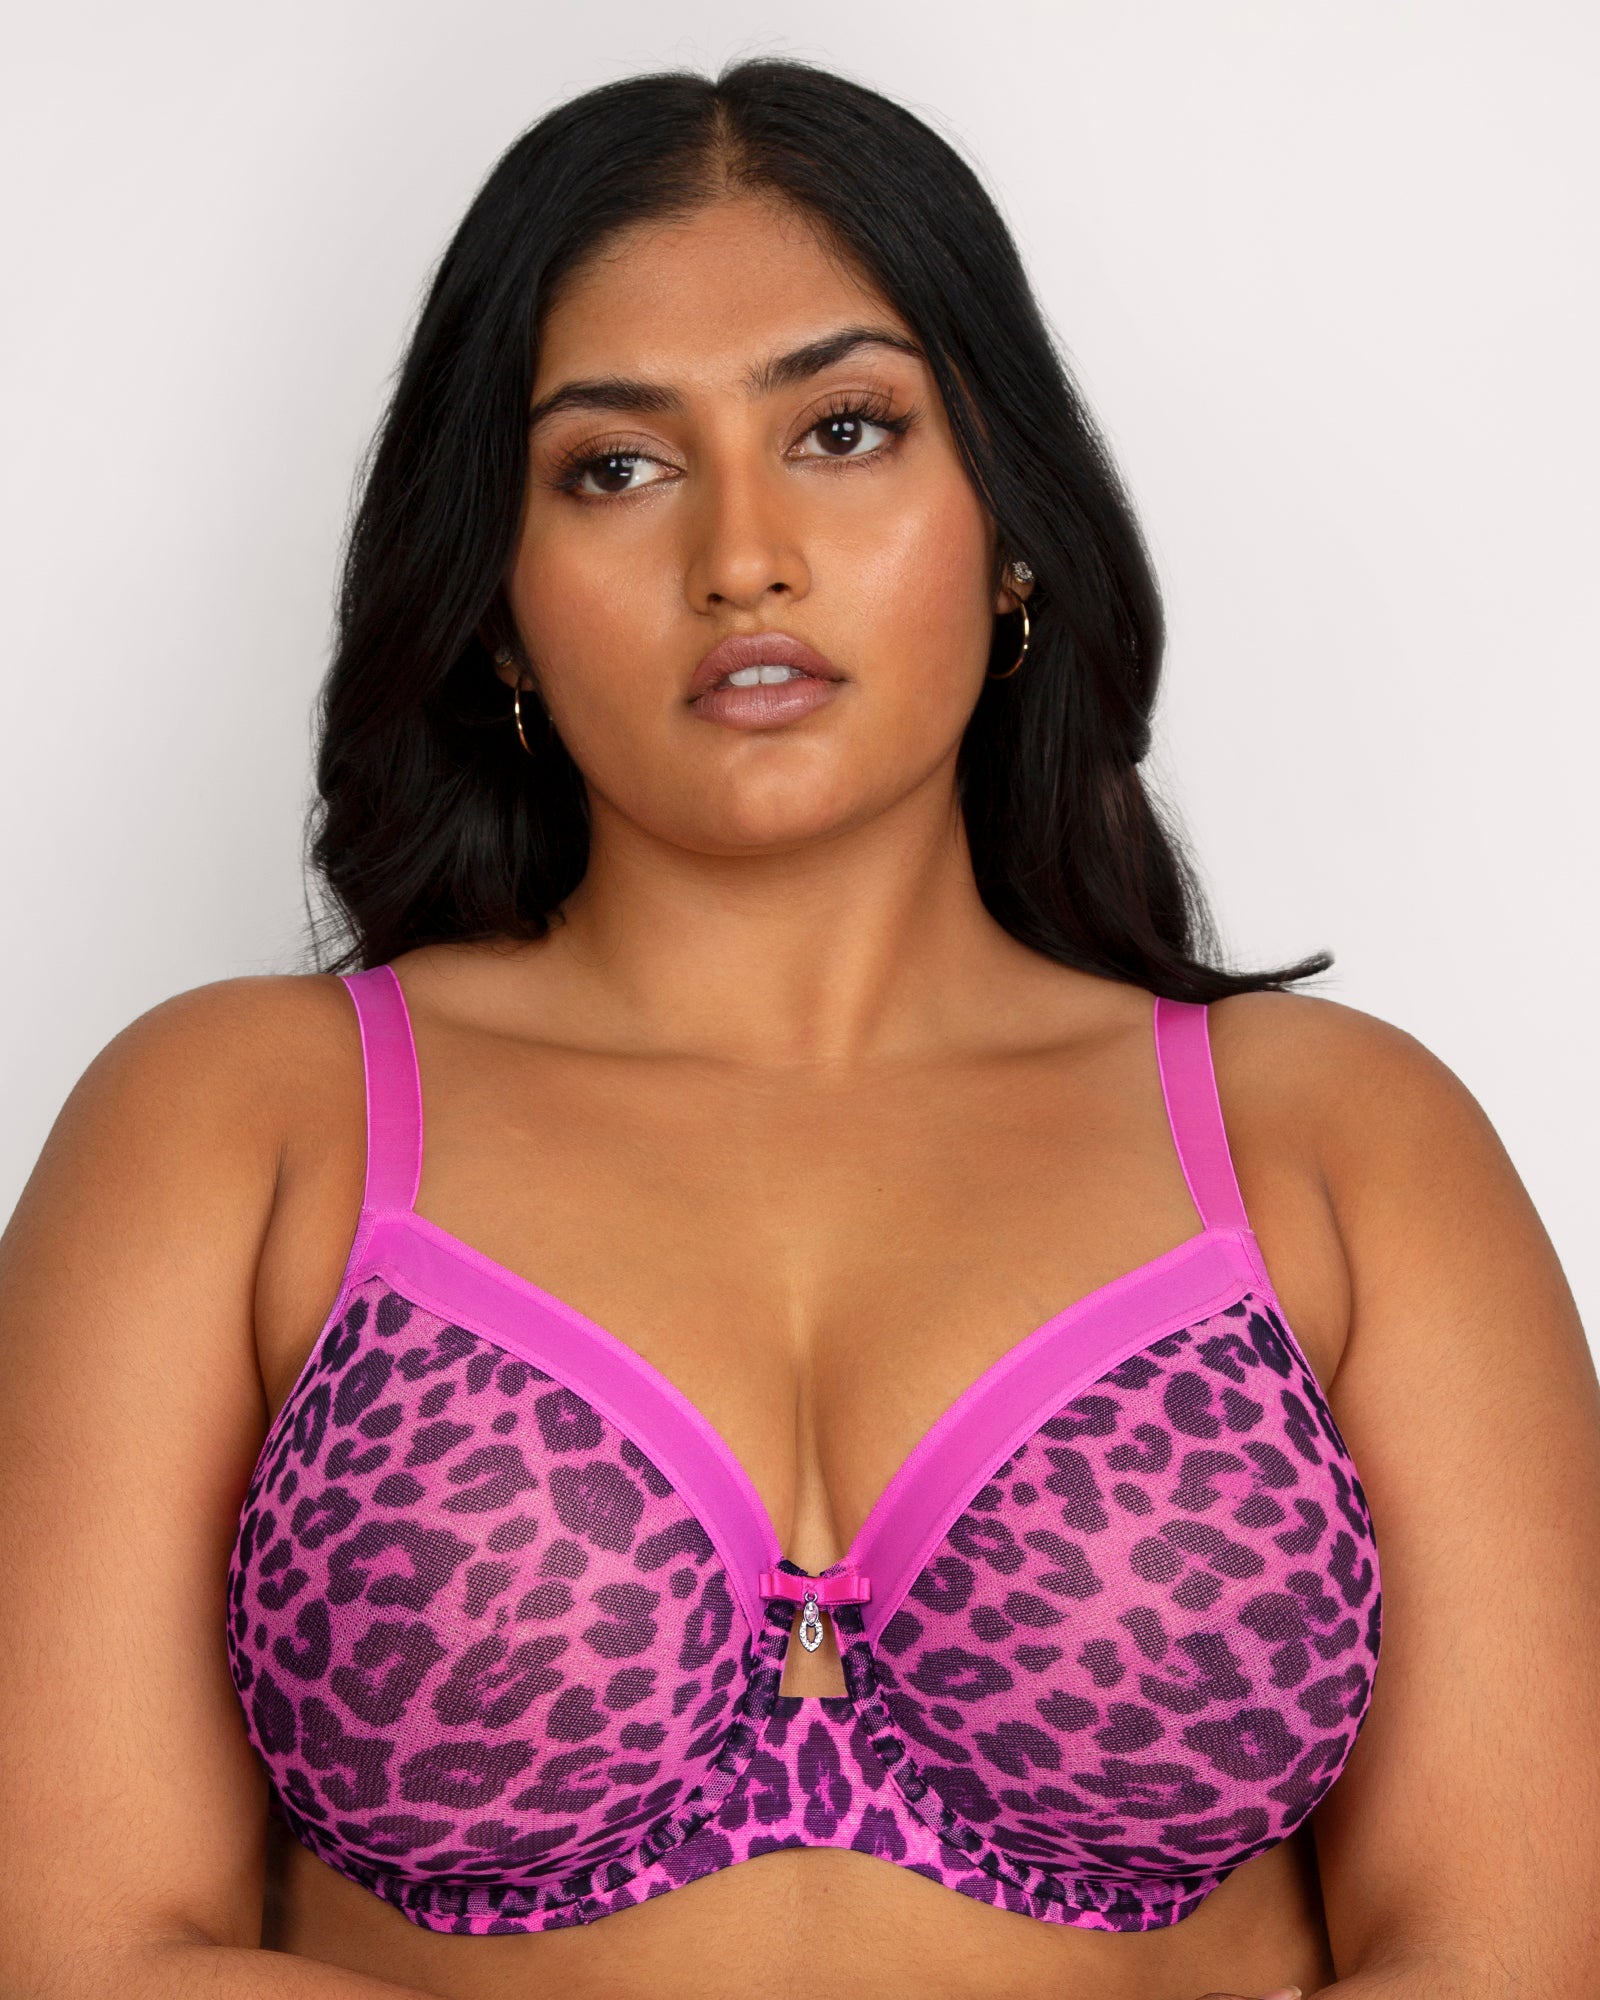 Pink and Black Leopard Print Underwire Bra 34D Only Size Left 